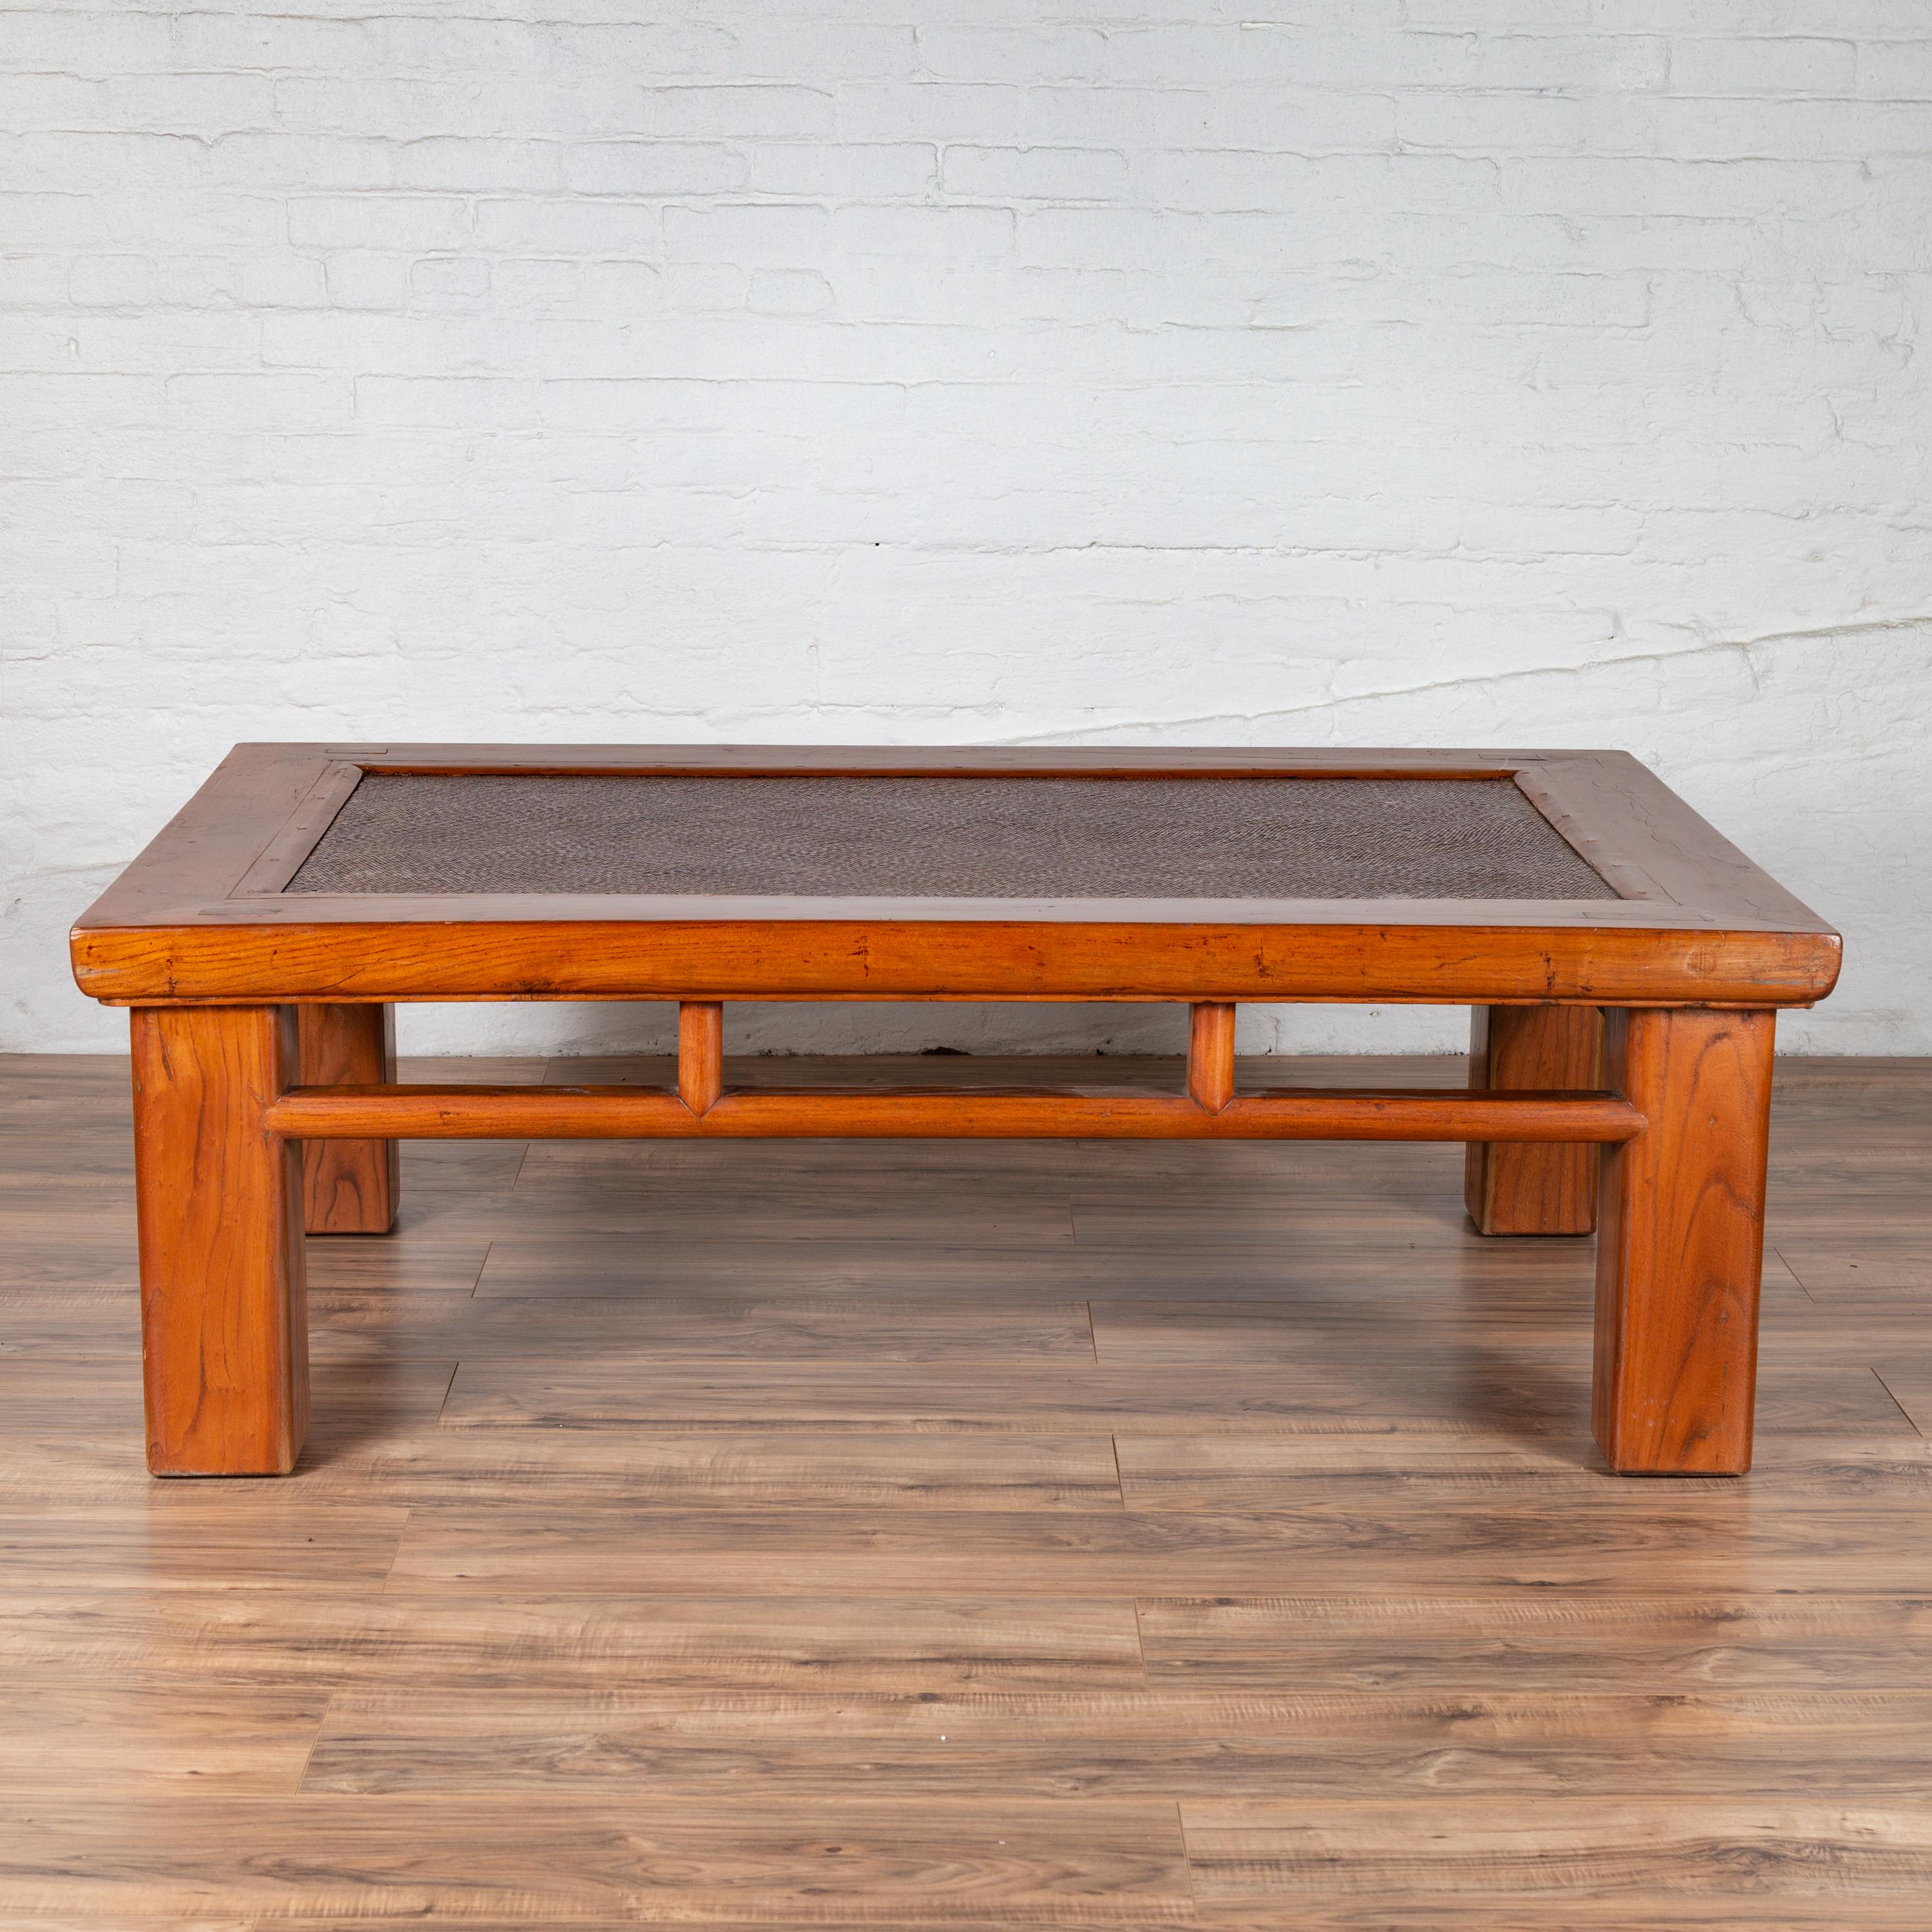 An antique Chinese elm coffee table from the early 20th century, with square legs, pillar-shaped strut motifs and rattan inset. Born in China during the early years of the 20th century, this Chinese coffee table features a rectangular top with